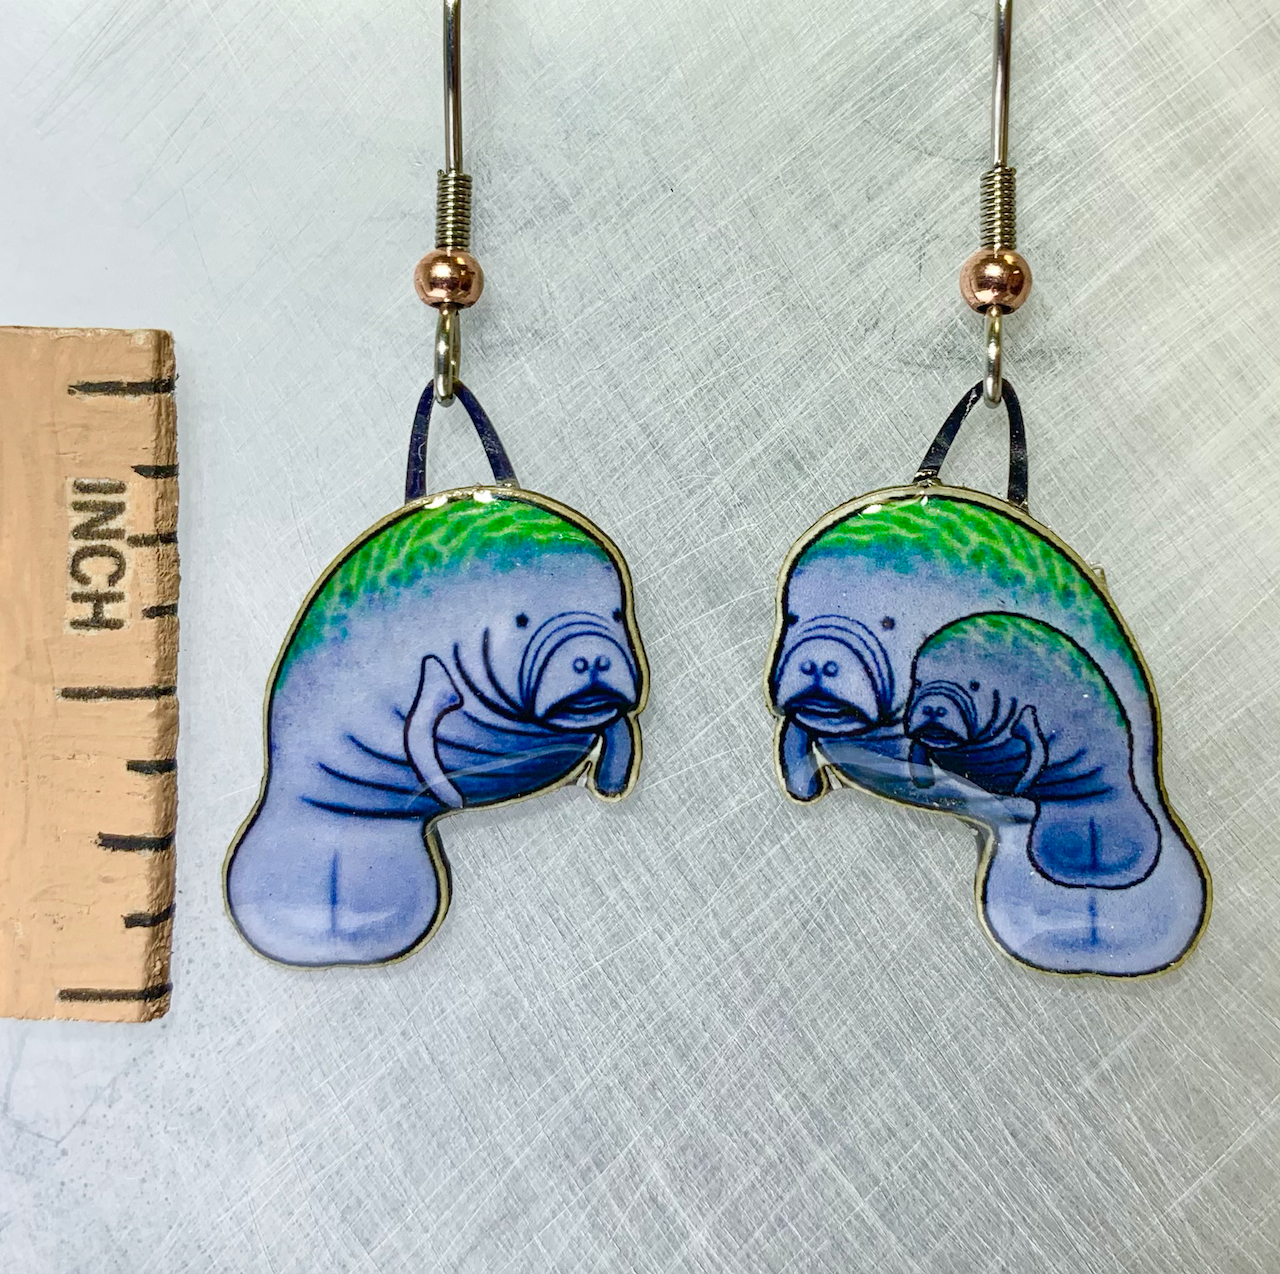 Picture shown is of 1 inch tall pair of earrings of the marine animal the Manatee.